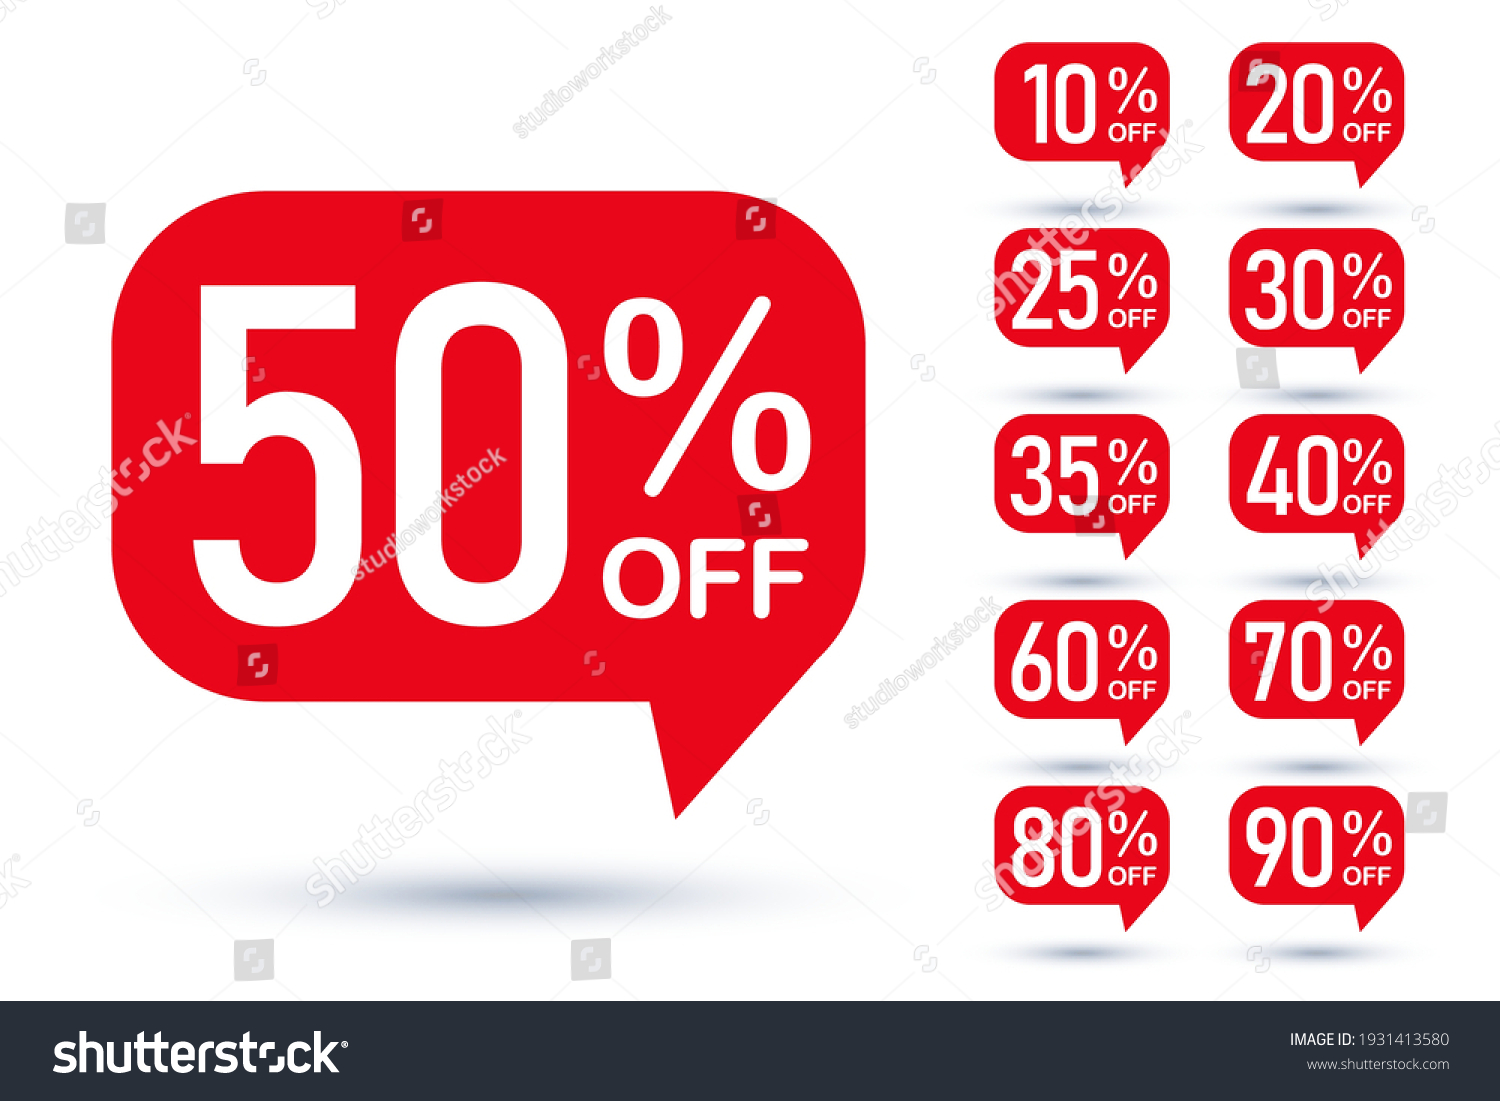 Sale tag speech bubble red shape with different discount set. 10, 20, 25, 30, 35, 40, 50, 60, 70, 80 and 90 percent price clearance sticker badge banner label vector illustration isolated on white #1931413580